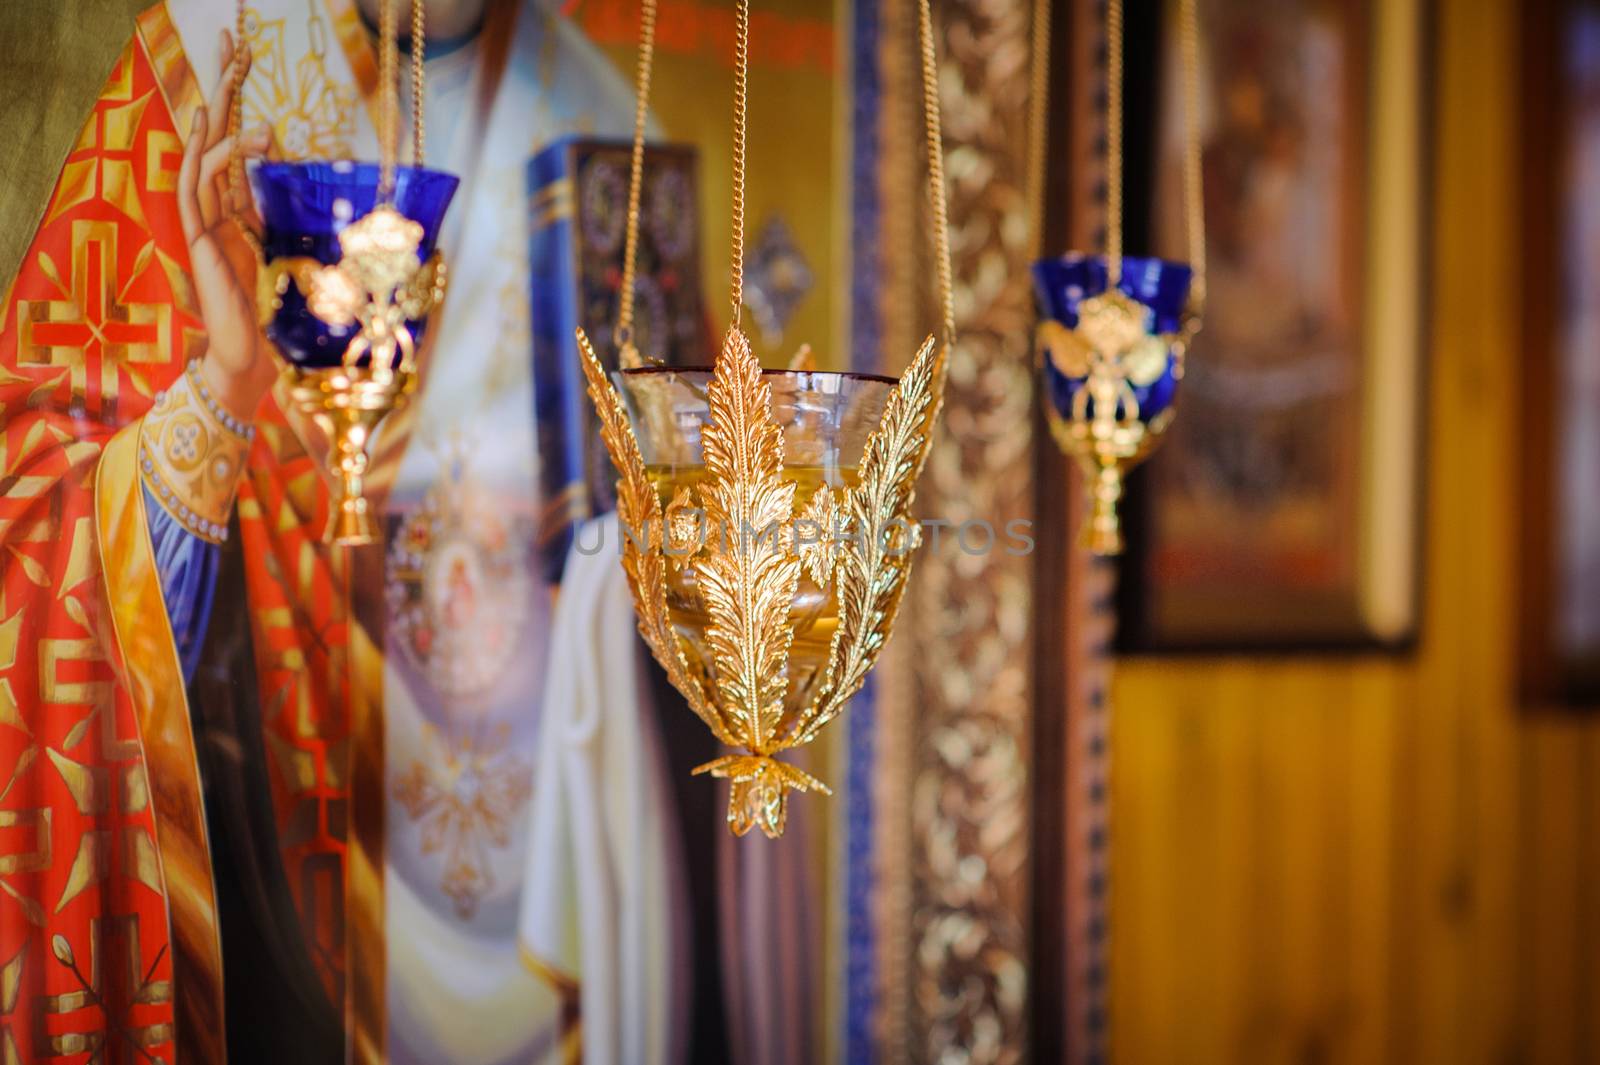 Gold stands in the Orthodox Church.